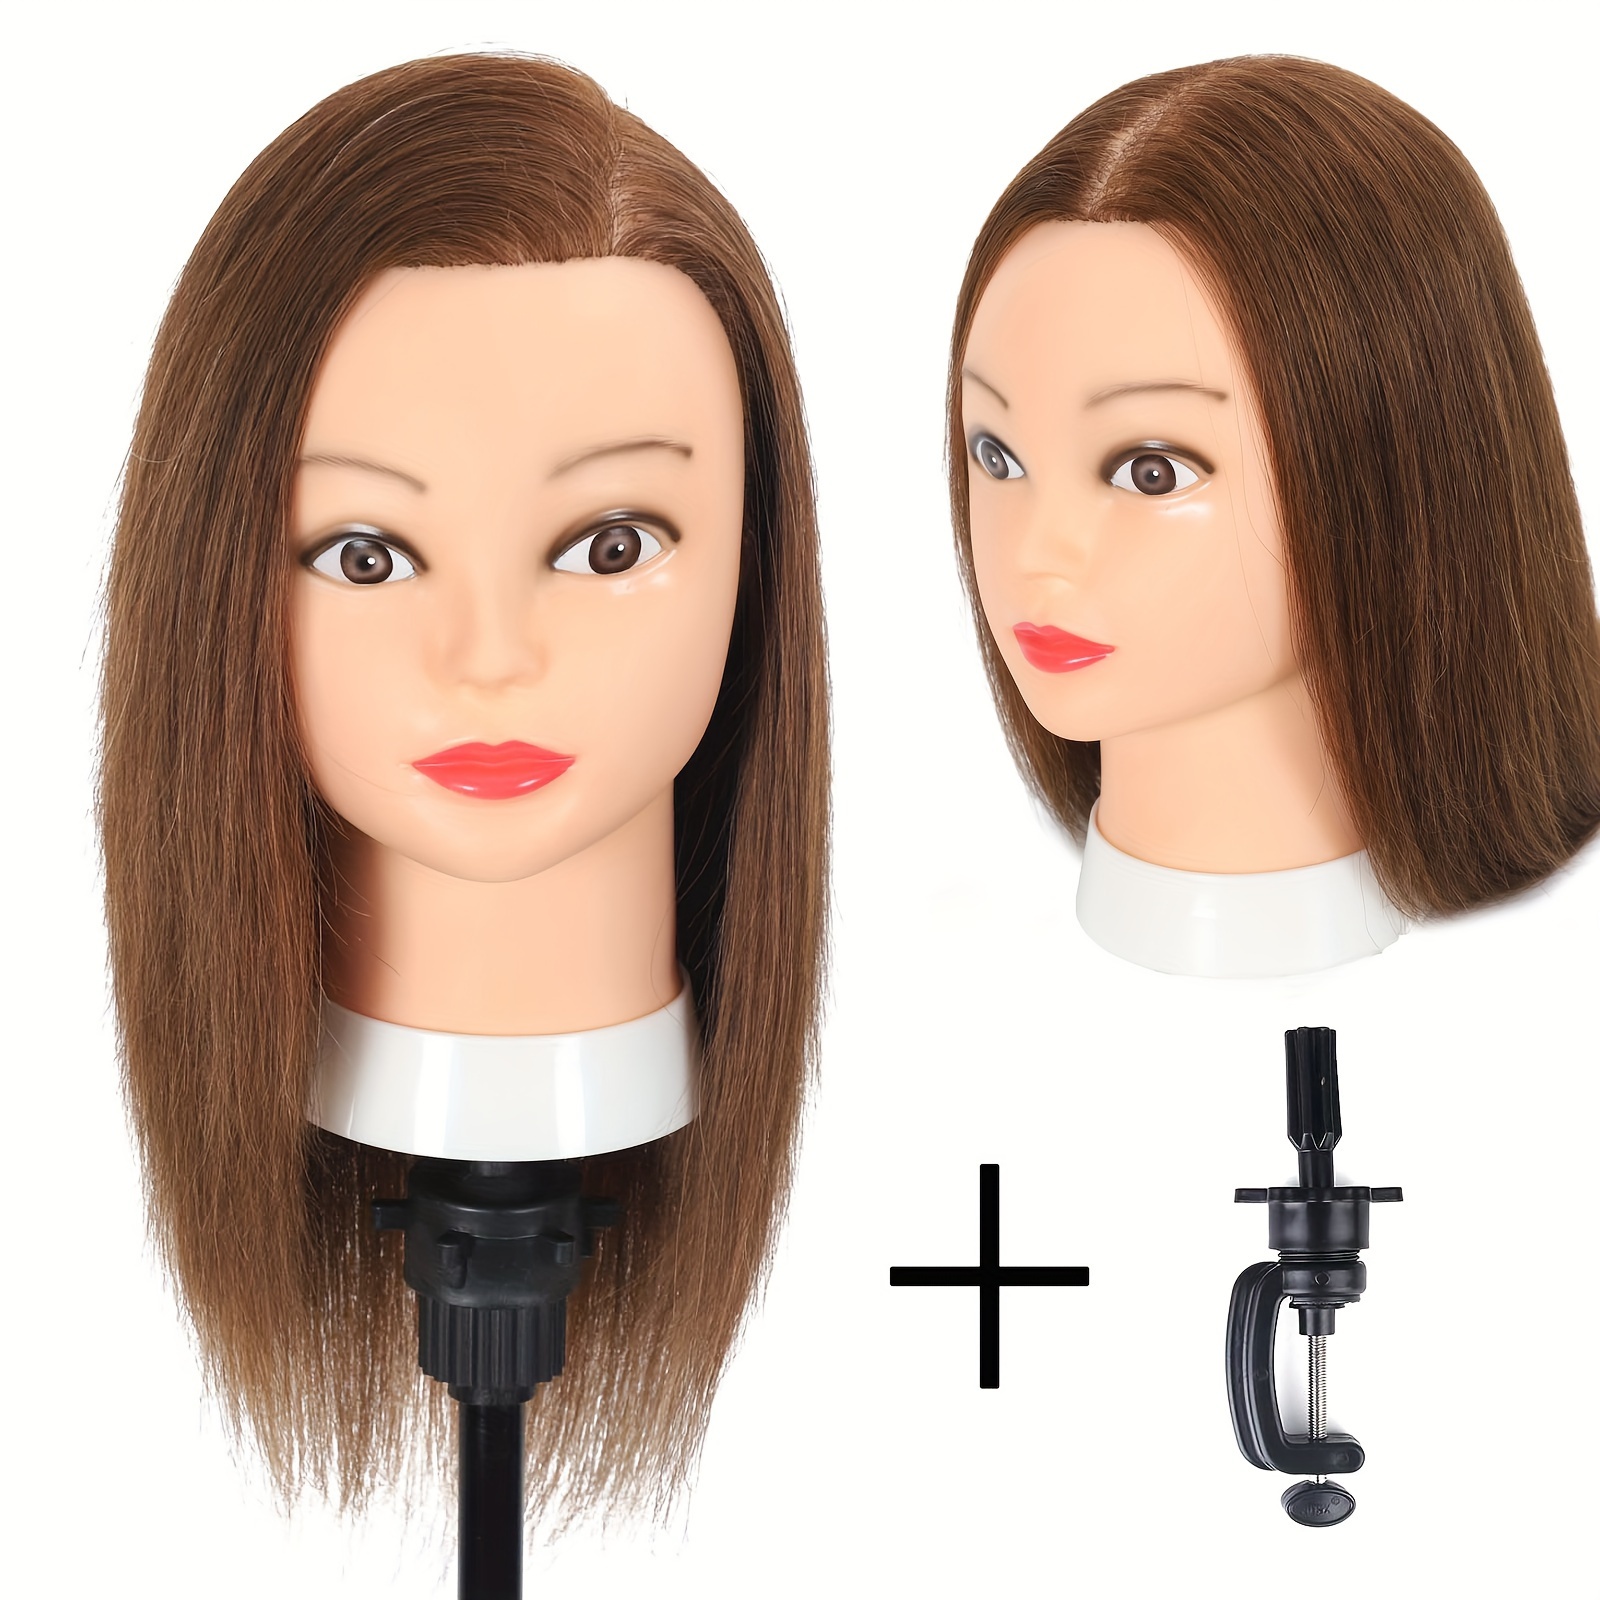 Long Hair Training Head Model Hairdressing Clamp Stand Dummy Practice Mannequin Doll Hair Hair Braiding Practice Head Real Hair Mannequin Heads